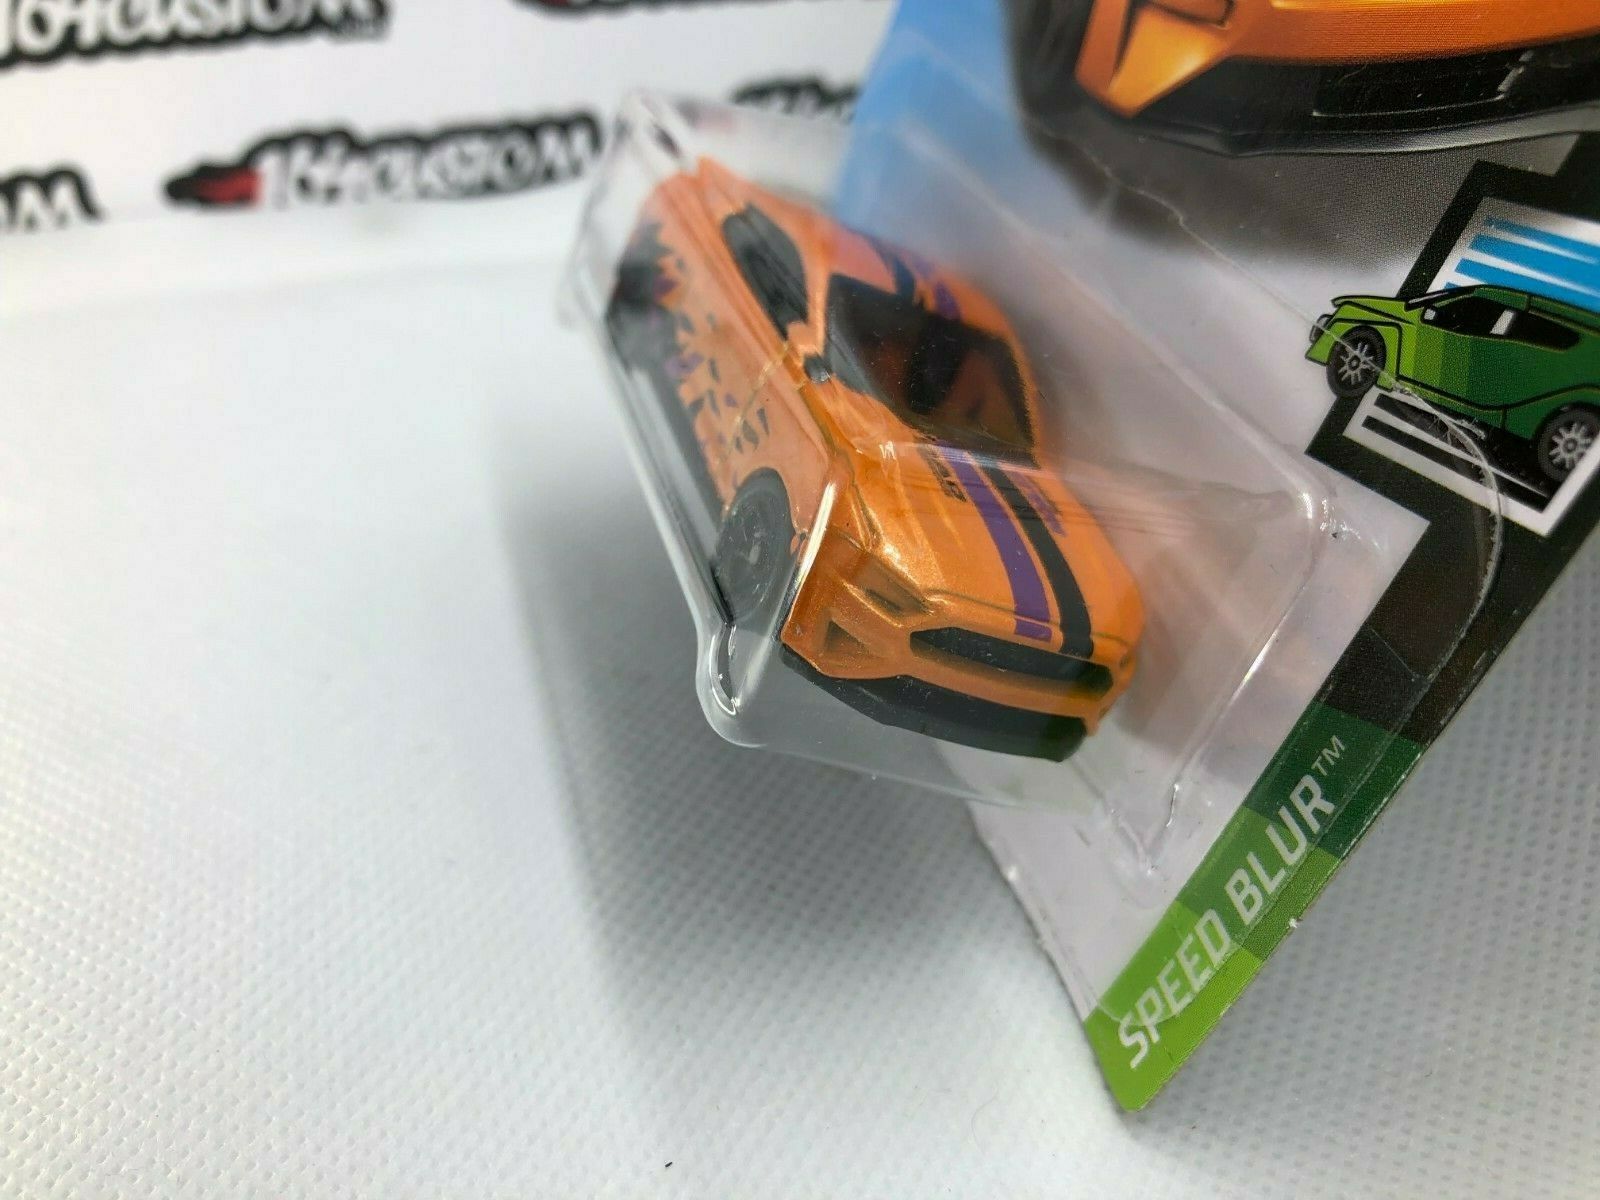 2018 Ford Mustang GT Hot Wheels